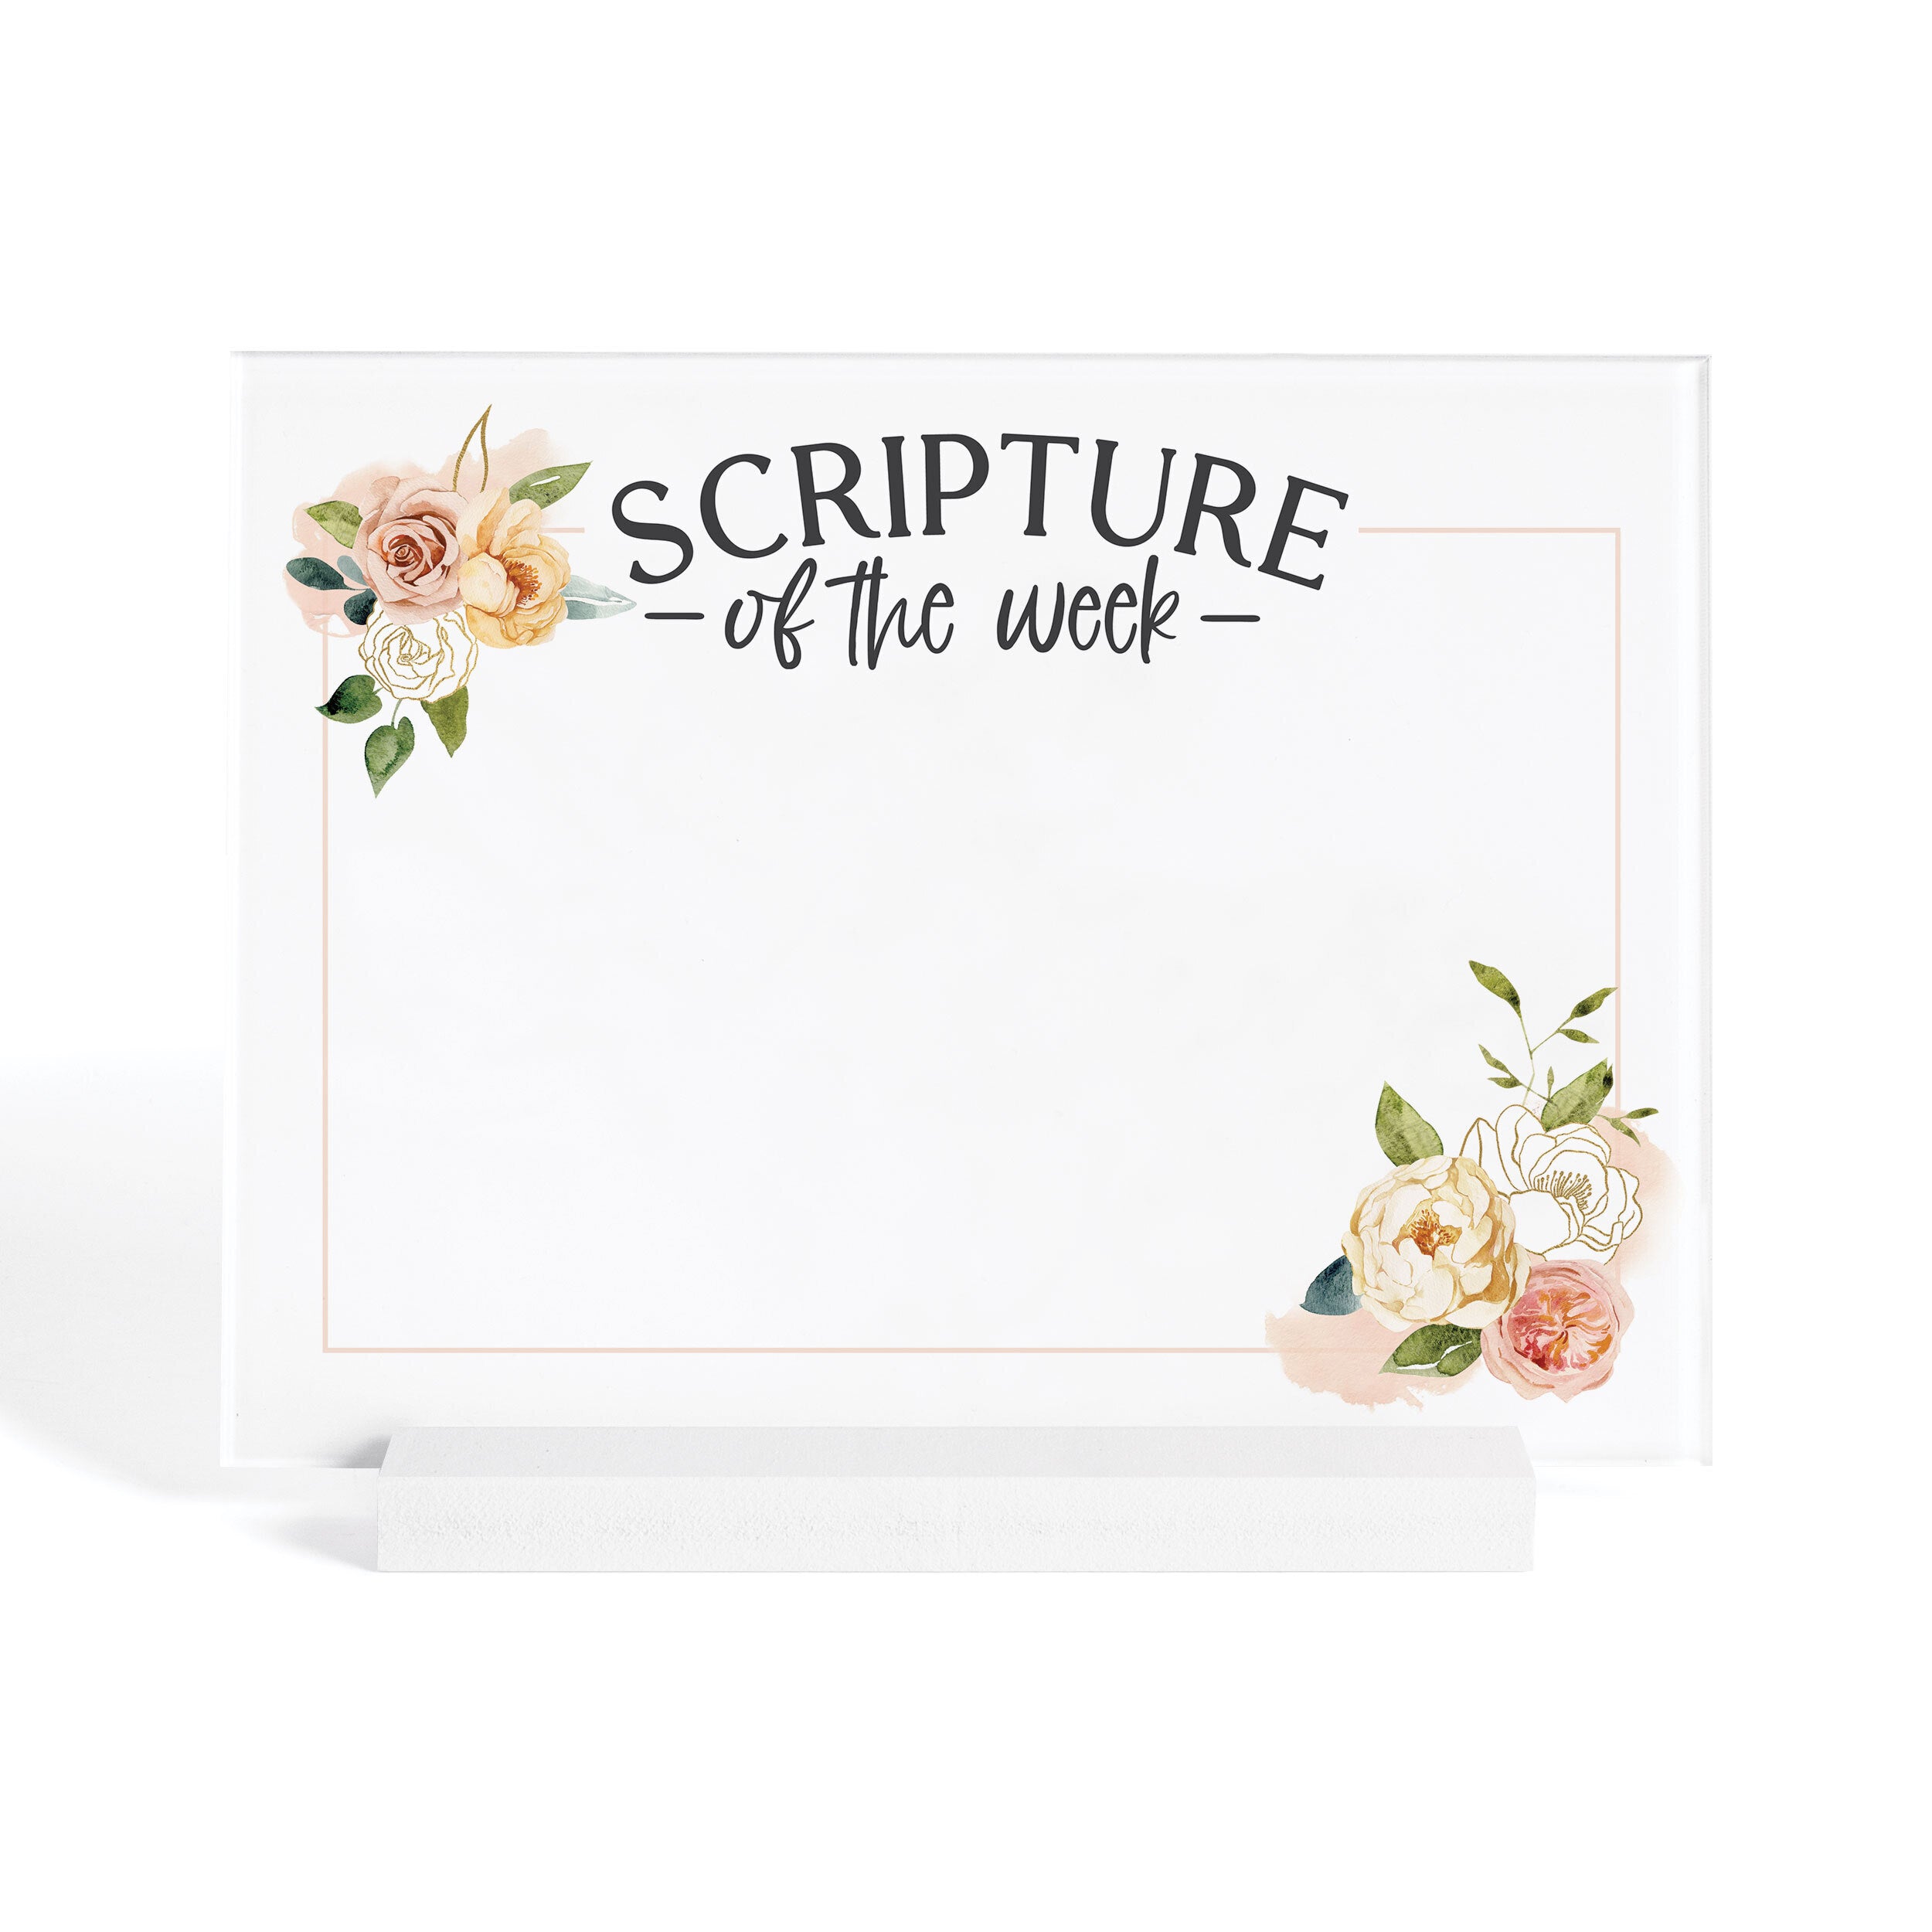 Scripture Of The Week Dry Erase Marker Board with Wooden Base